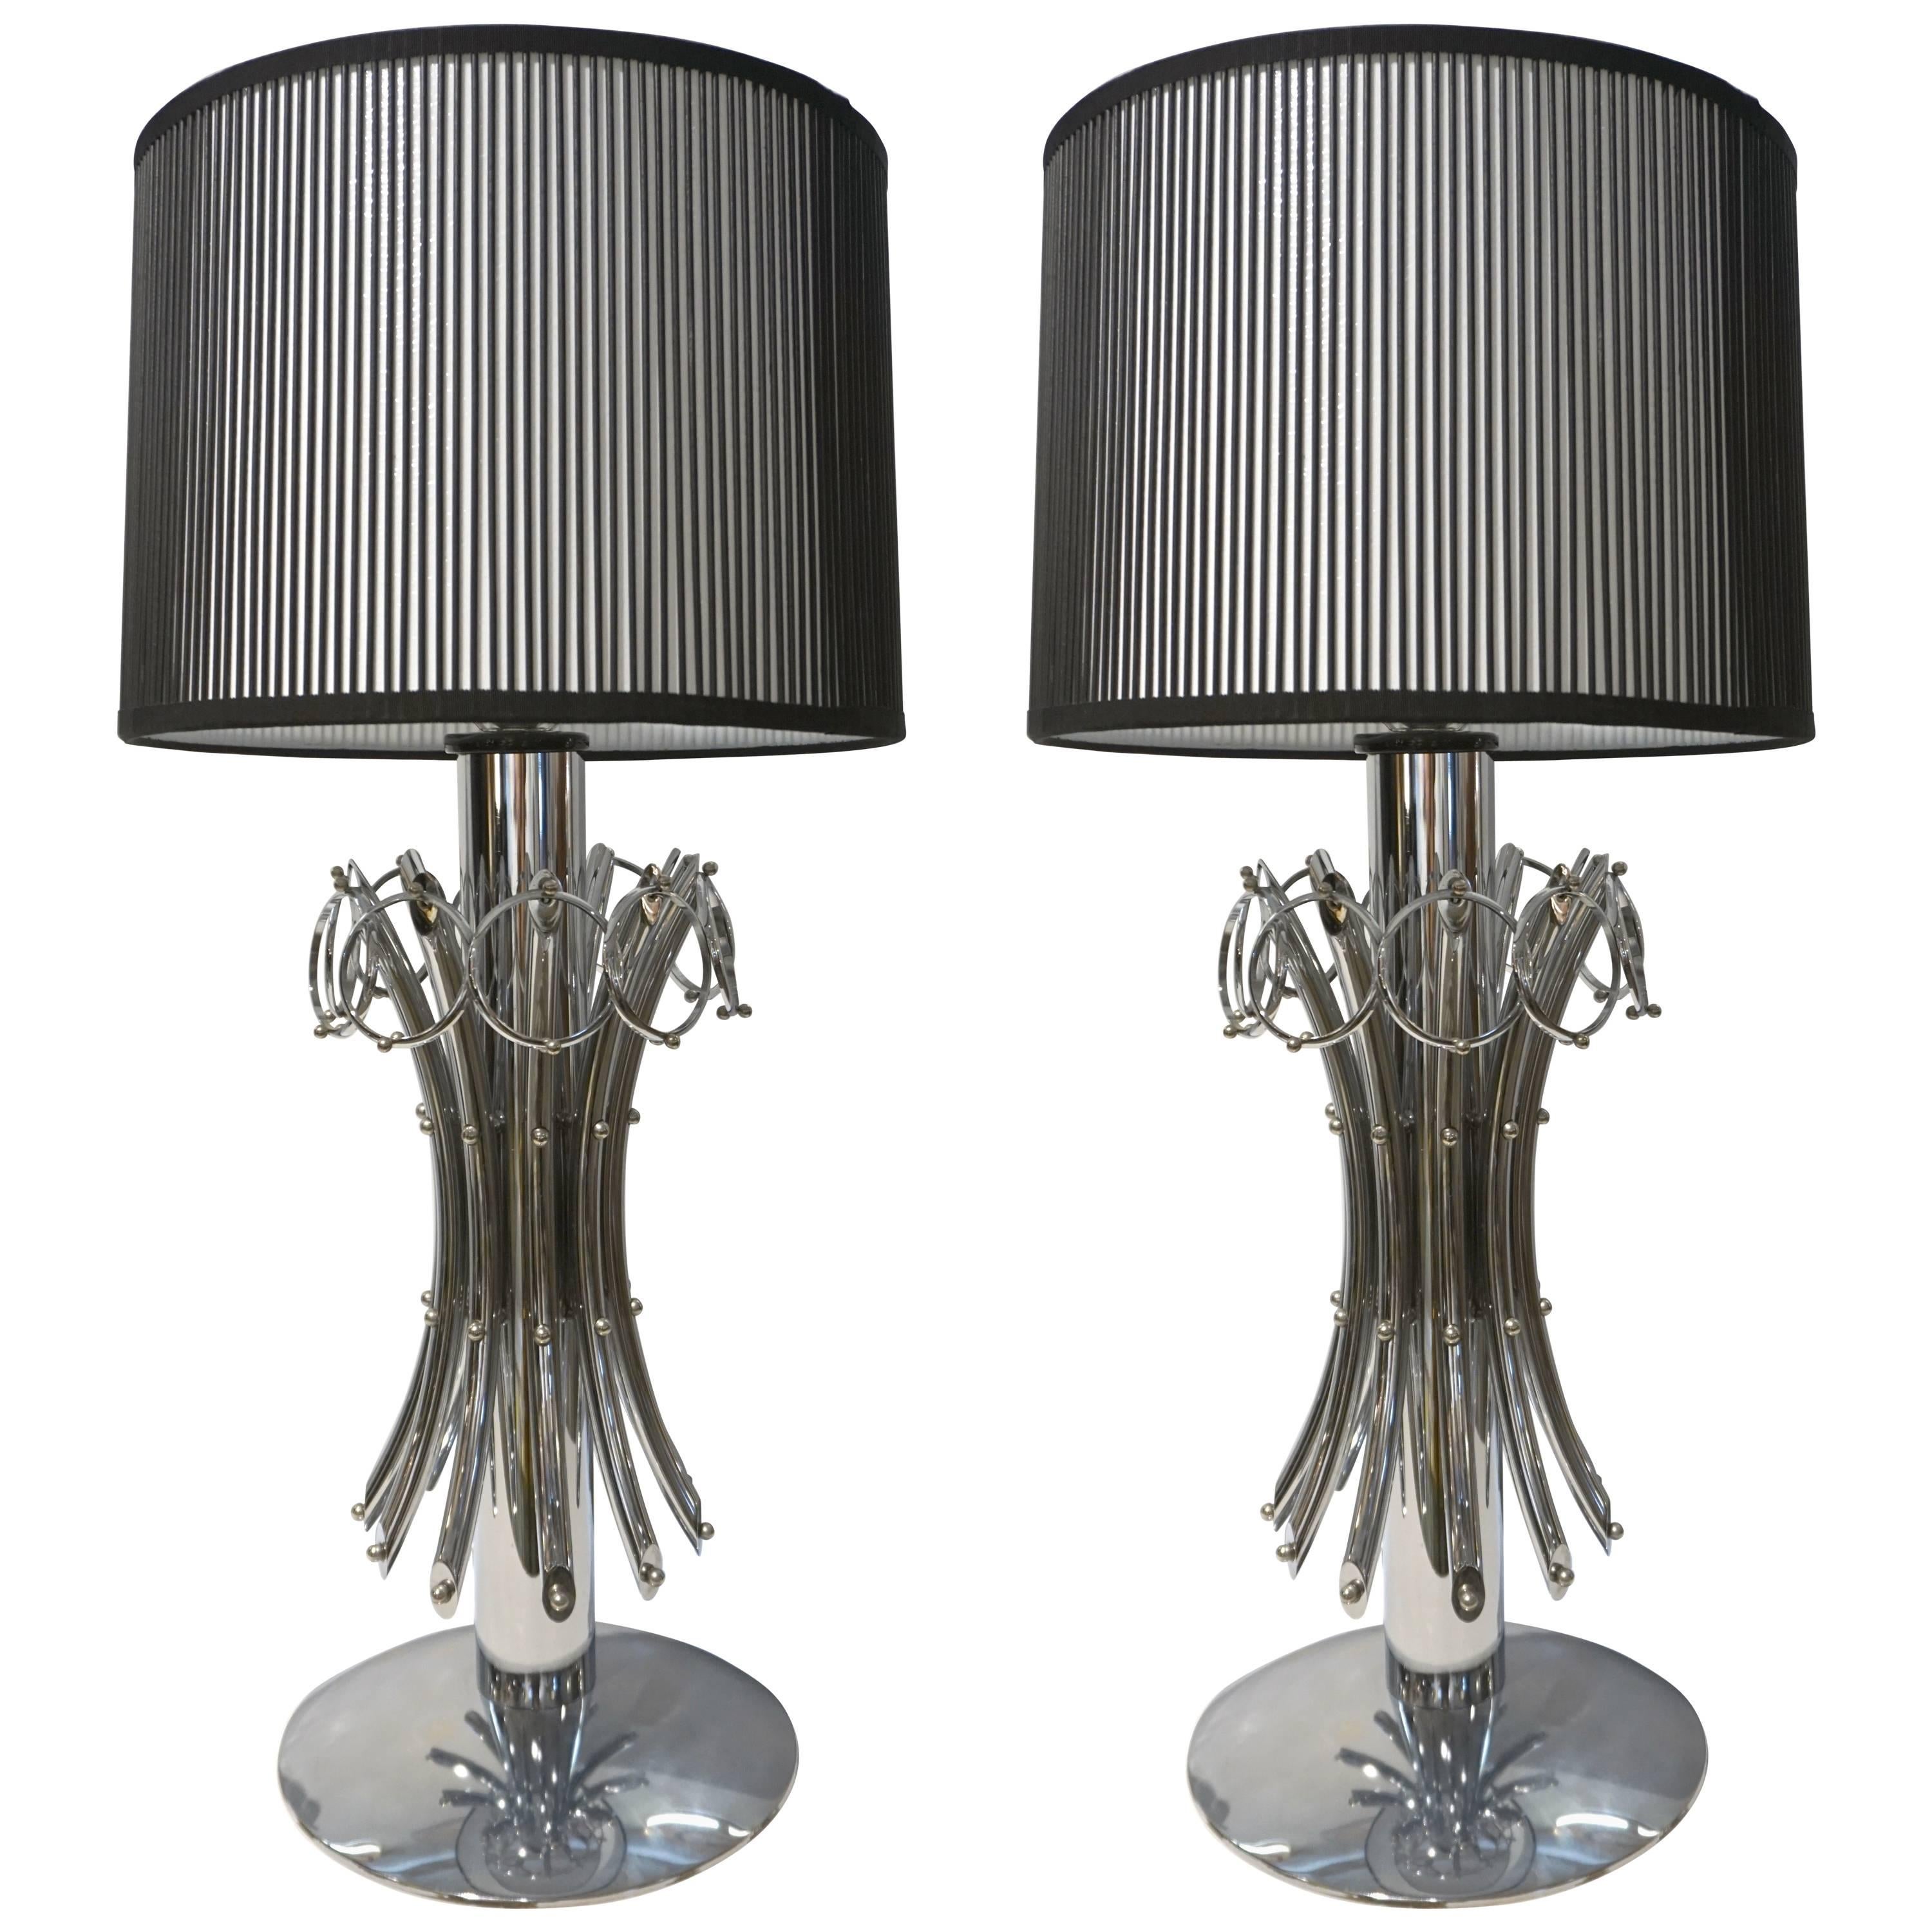 1970s Italian Vintage Tall Pair of Organic Nickel Table Lamps with Pendant Rings